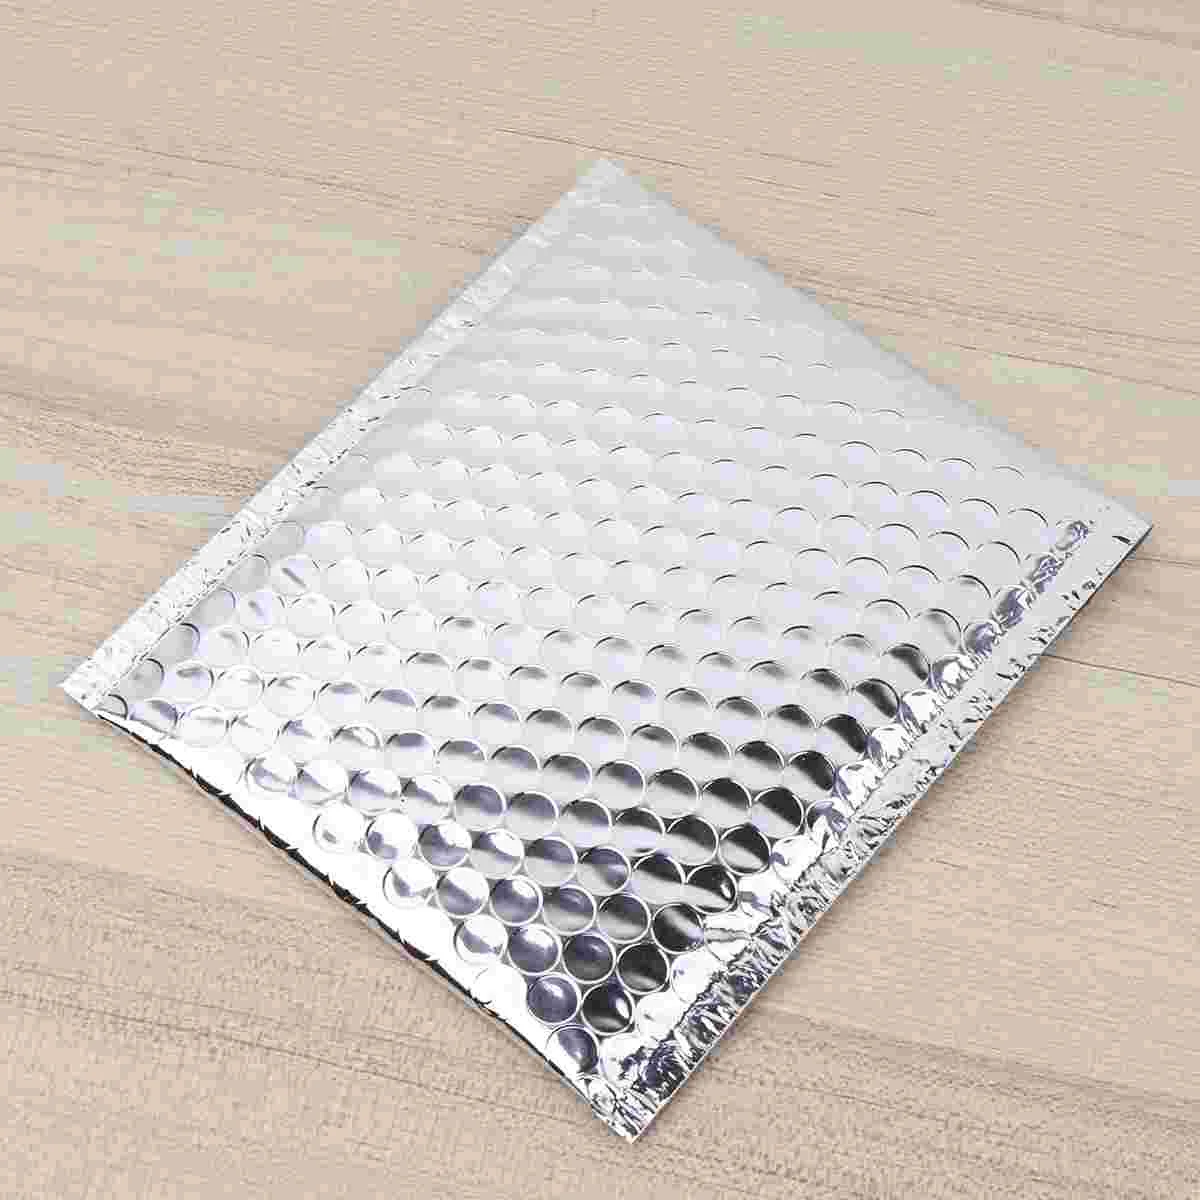 28 Pcs Bubble Bag Shockproof Packaging Metal Small Envelope Waterproof Logistic Express 10pcs poly bubble envelope stationery packaging shipping bag cute puppy express bags for jewelry logistics bubble bag 15x20cm